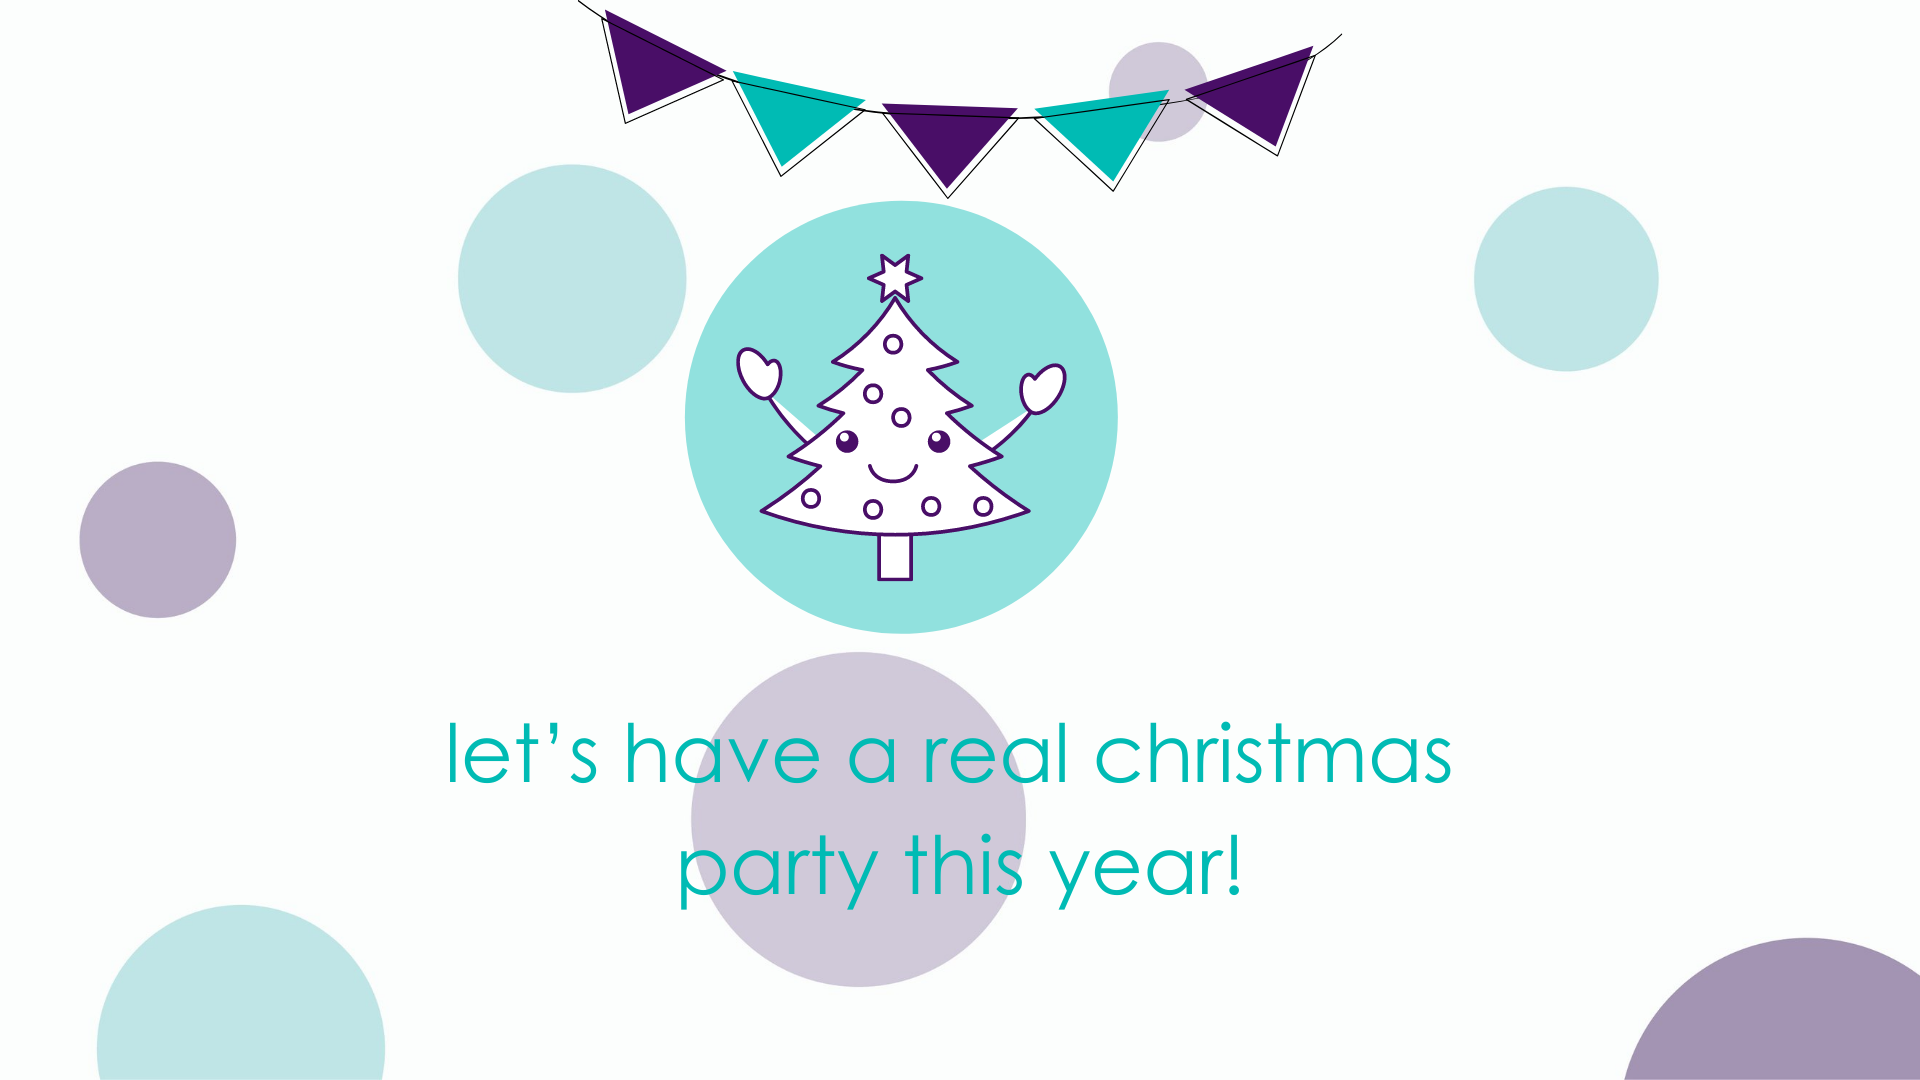 let’s have a real christmas party this year!